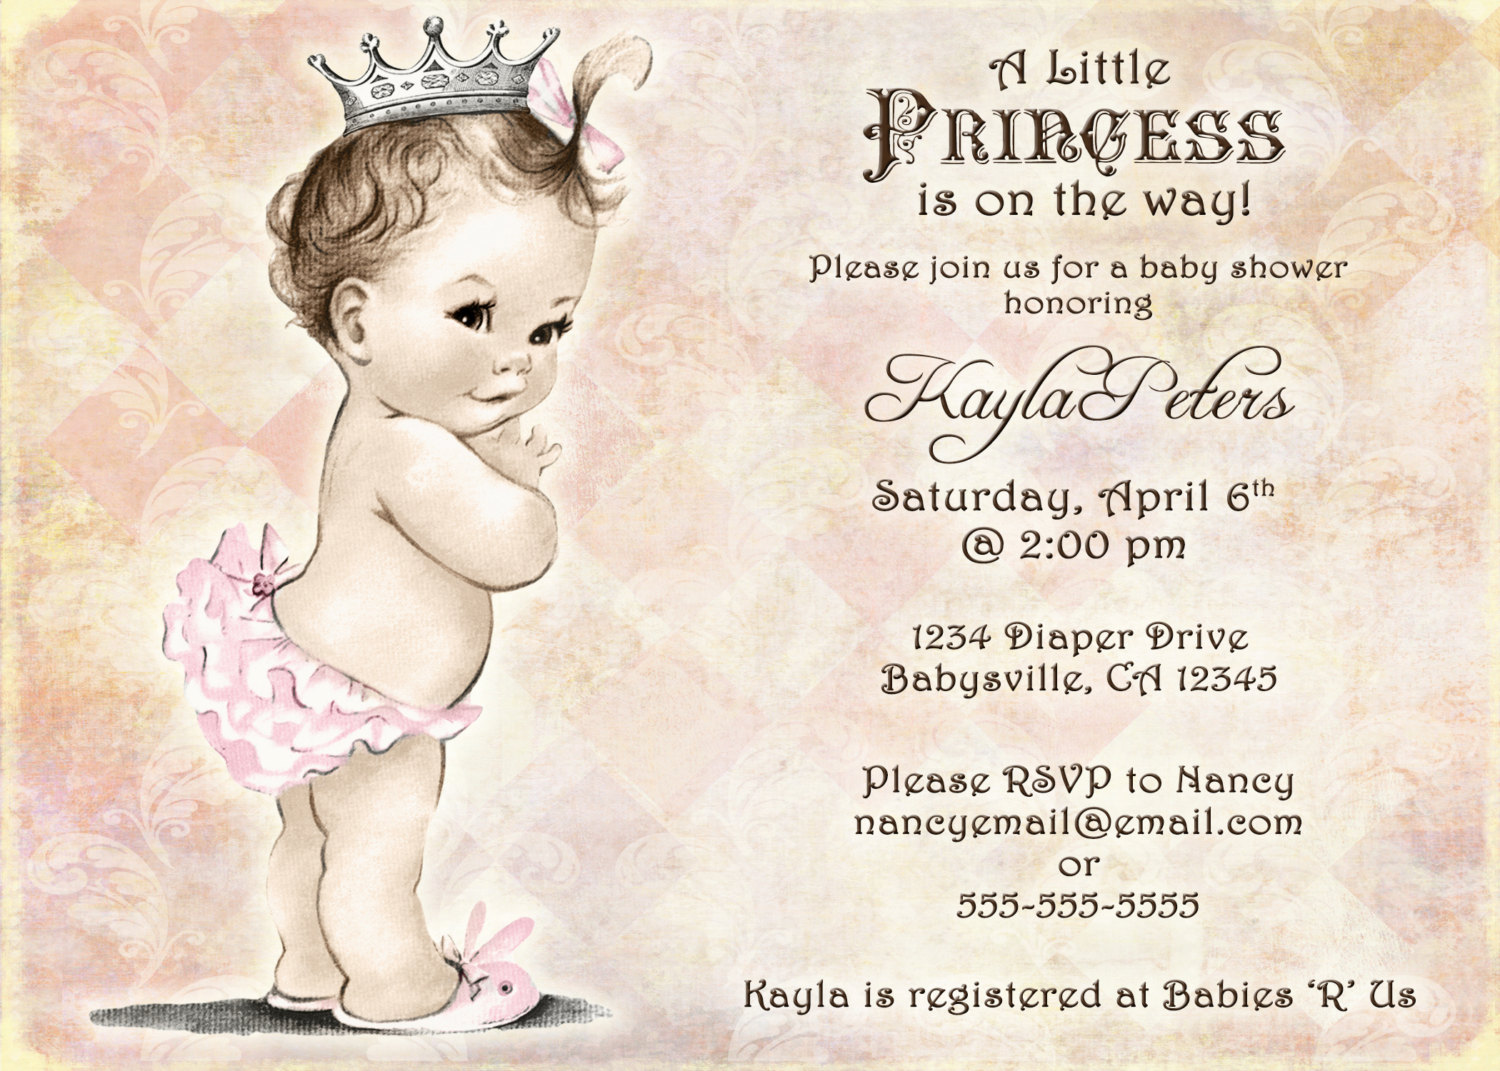 Full Size of Baby Shower:unique Baby Shower Themes Homemade Baby Shower Decorations Baby Shower Invitations Baby Girl Themes Baby Boy Shower Ideas Themes For Baby Girl Nursery Baby Shower Themes Baby Shower Themes For Girls